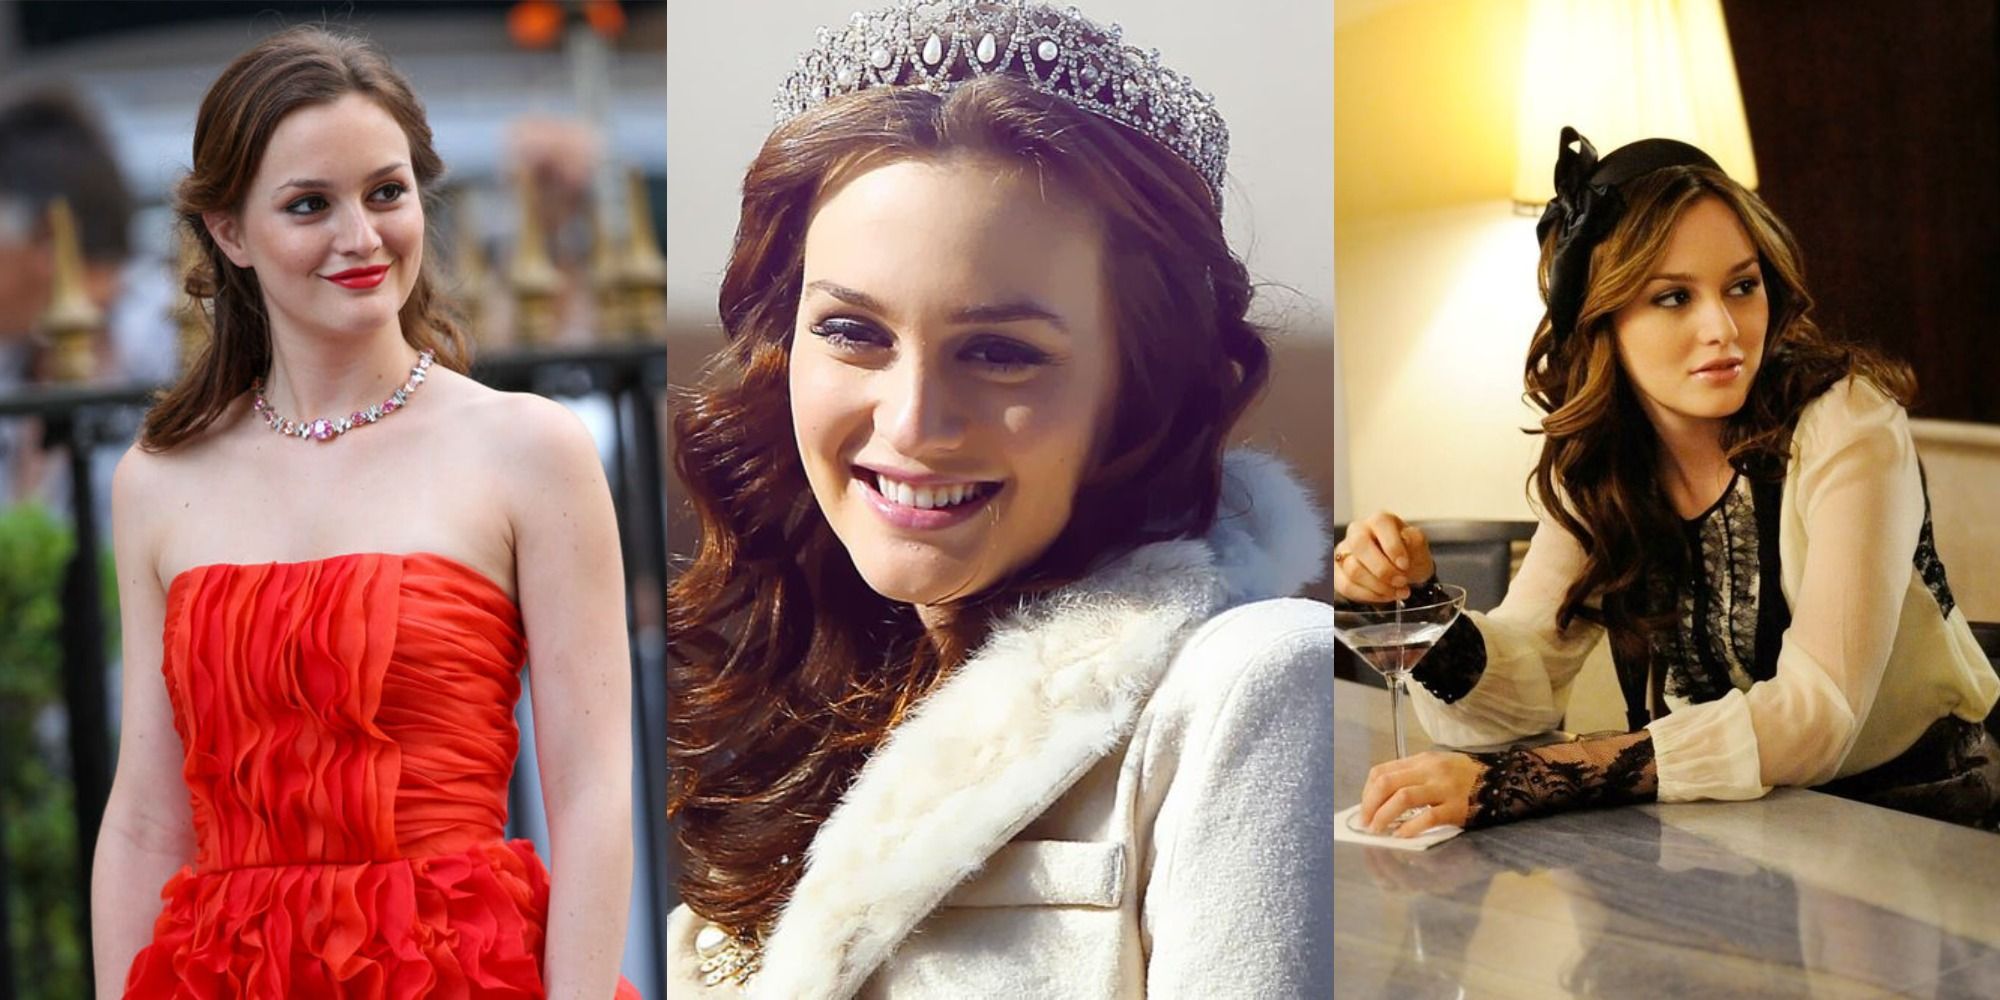 Gossip Girl: 10 Reasons Why Blair Was The True Queen B Of The Show